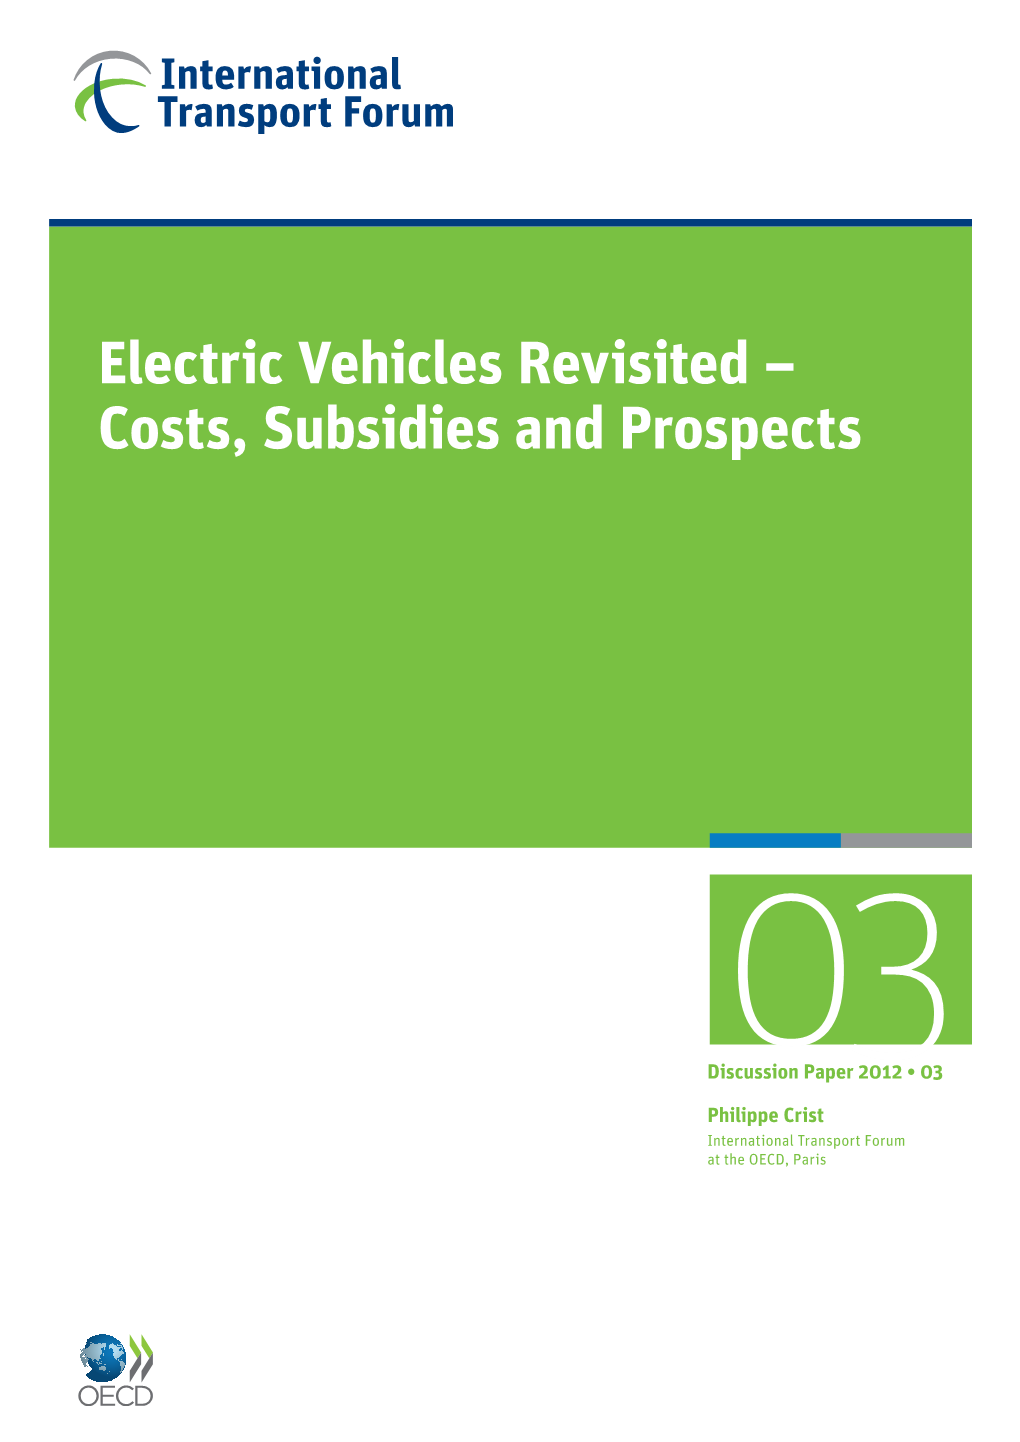 Electric Vehicles Revisited – Costs, Subsidies and Prospects